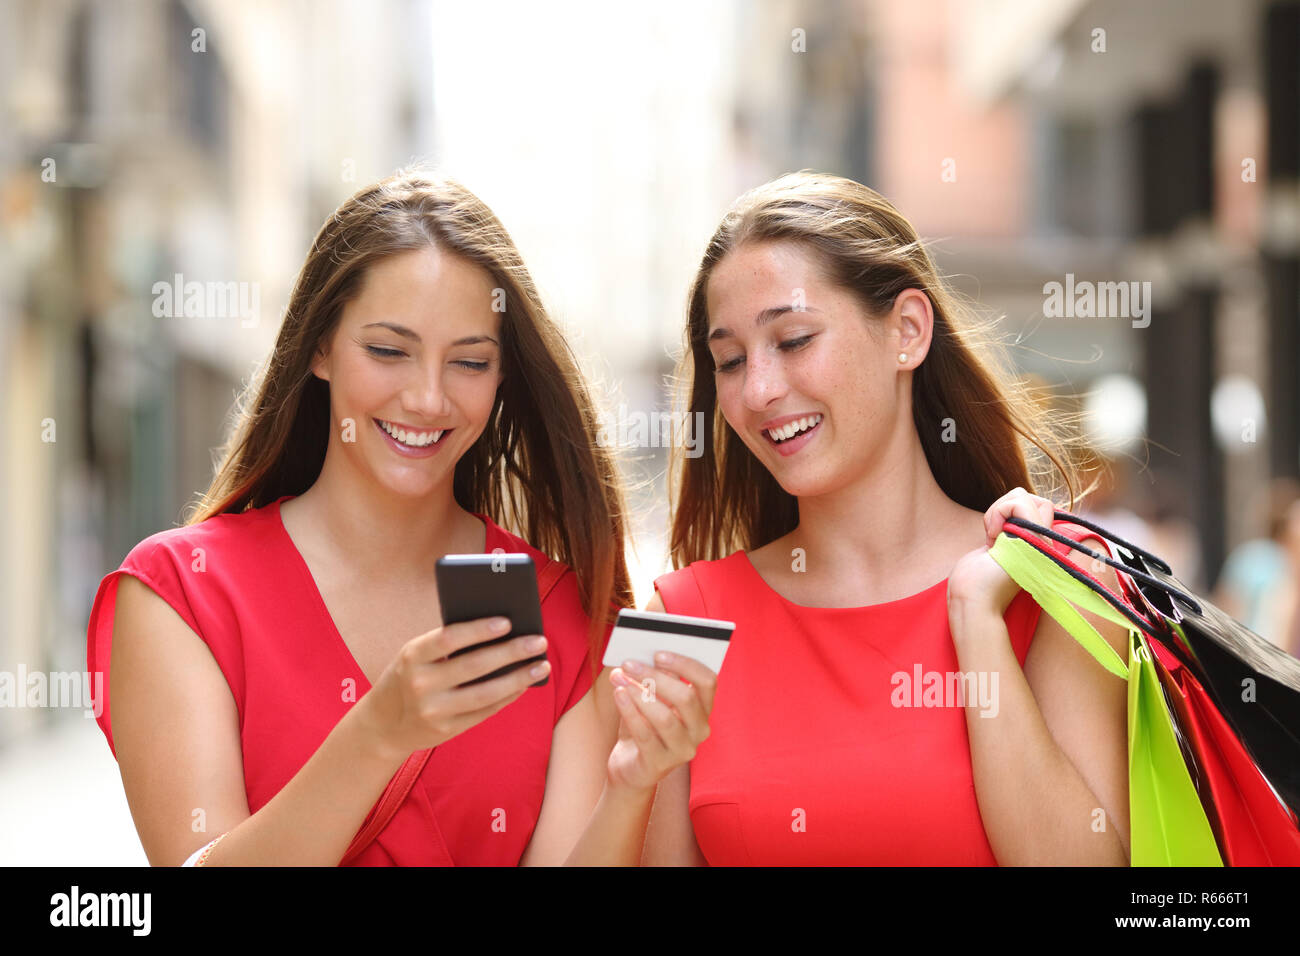 Front view of two happy shoppers buying online with credit card and cellphone walking in the street Stock Photo